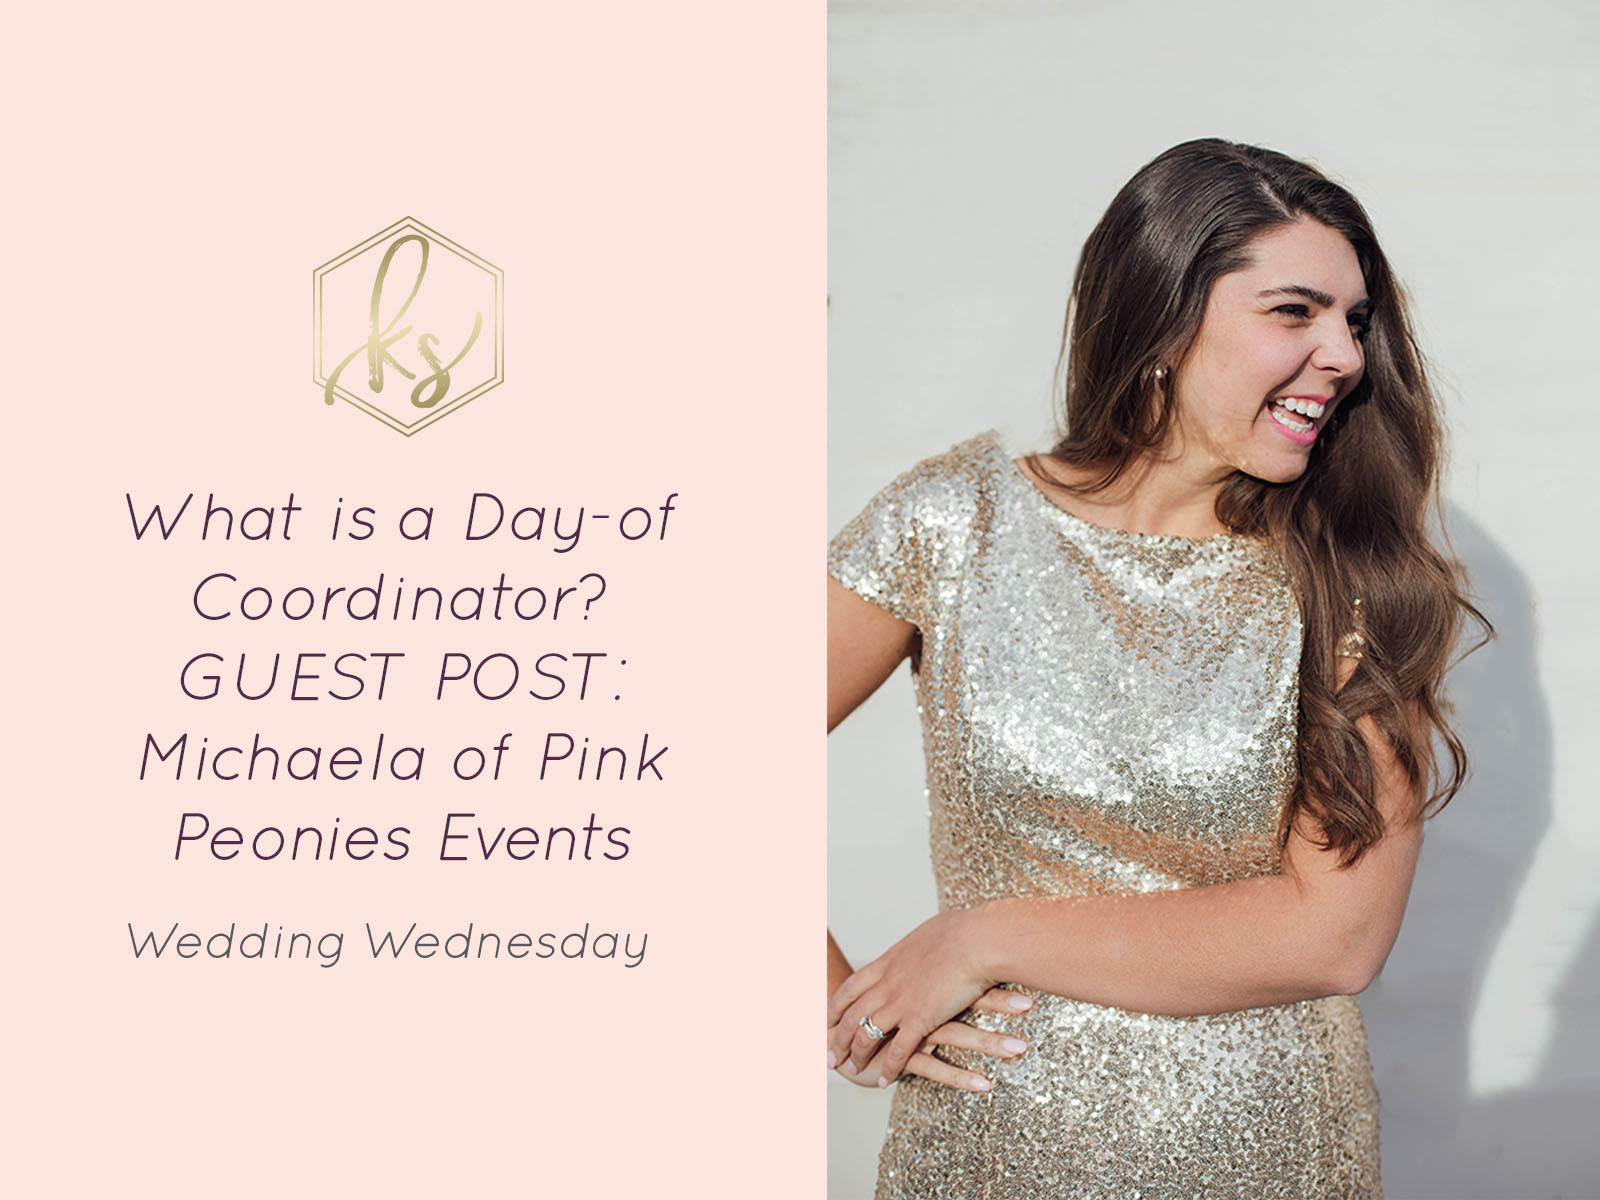 What is a Day of Wedding Coordinator